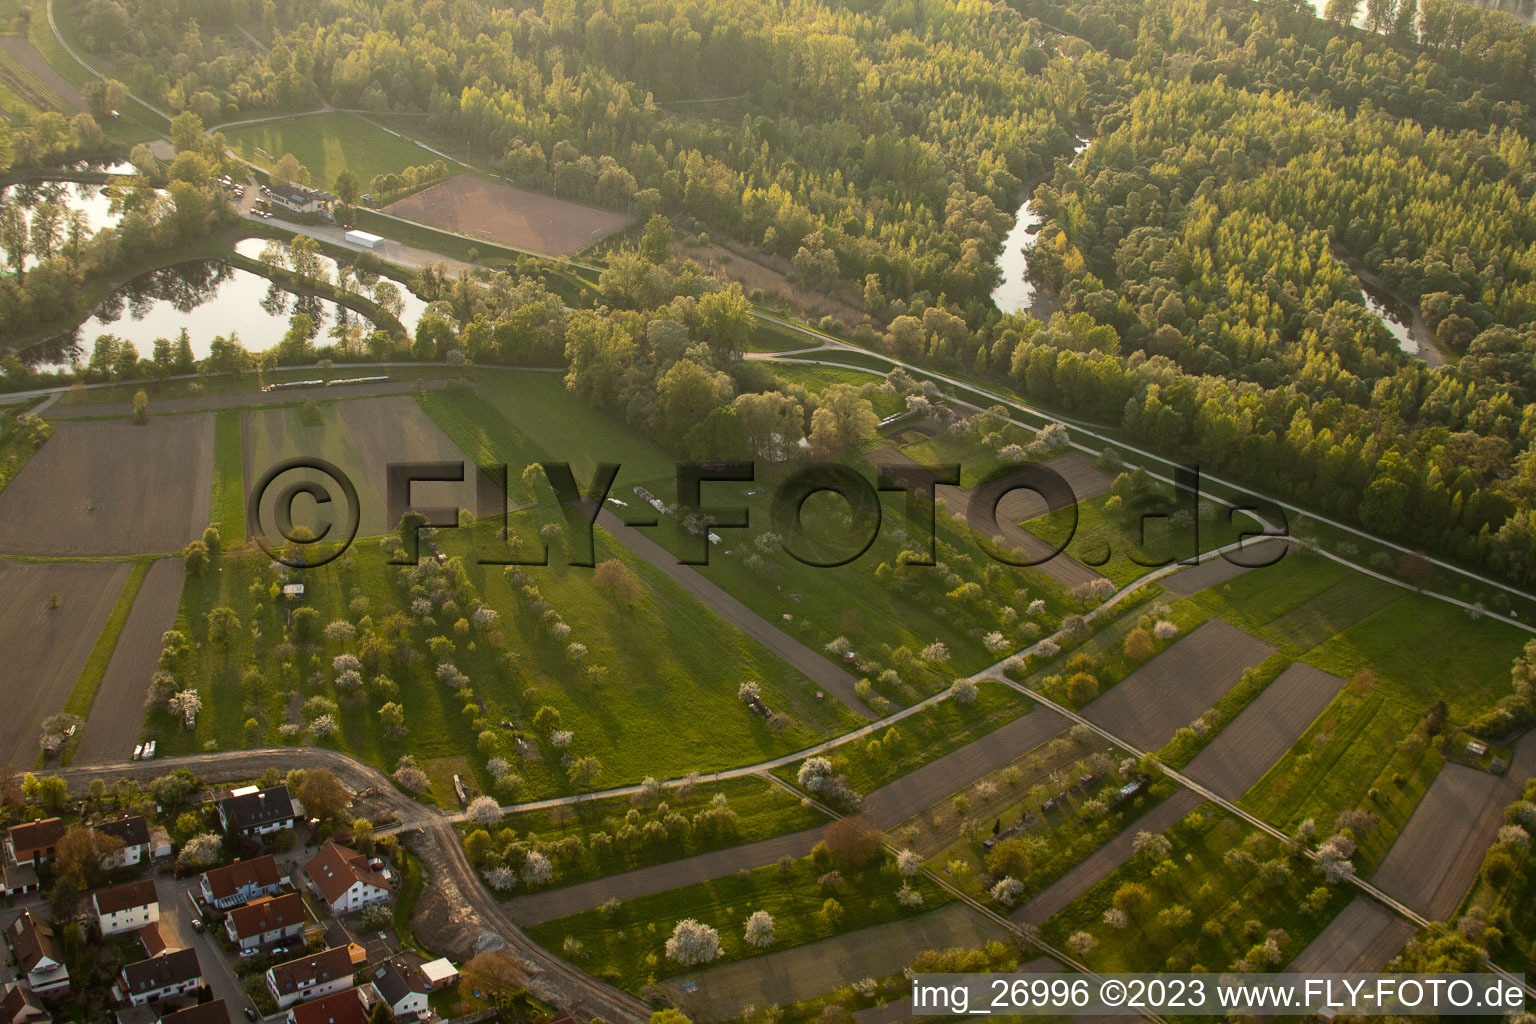 Au am Rhein in the state Baden-Wuerttemberg, Germany seen from above